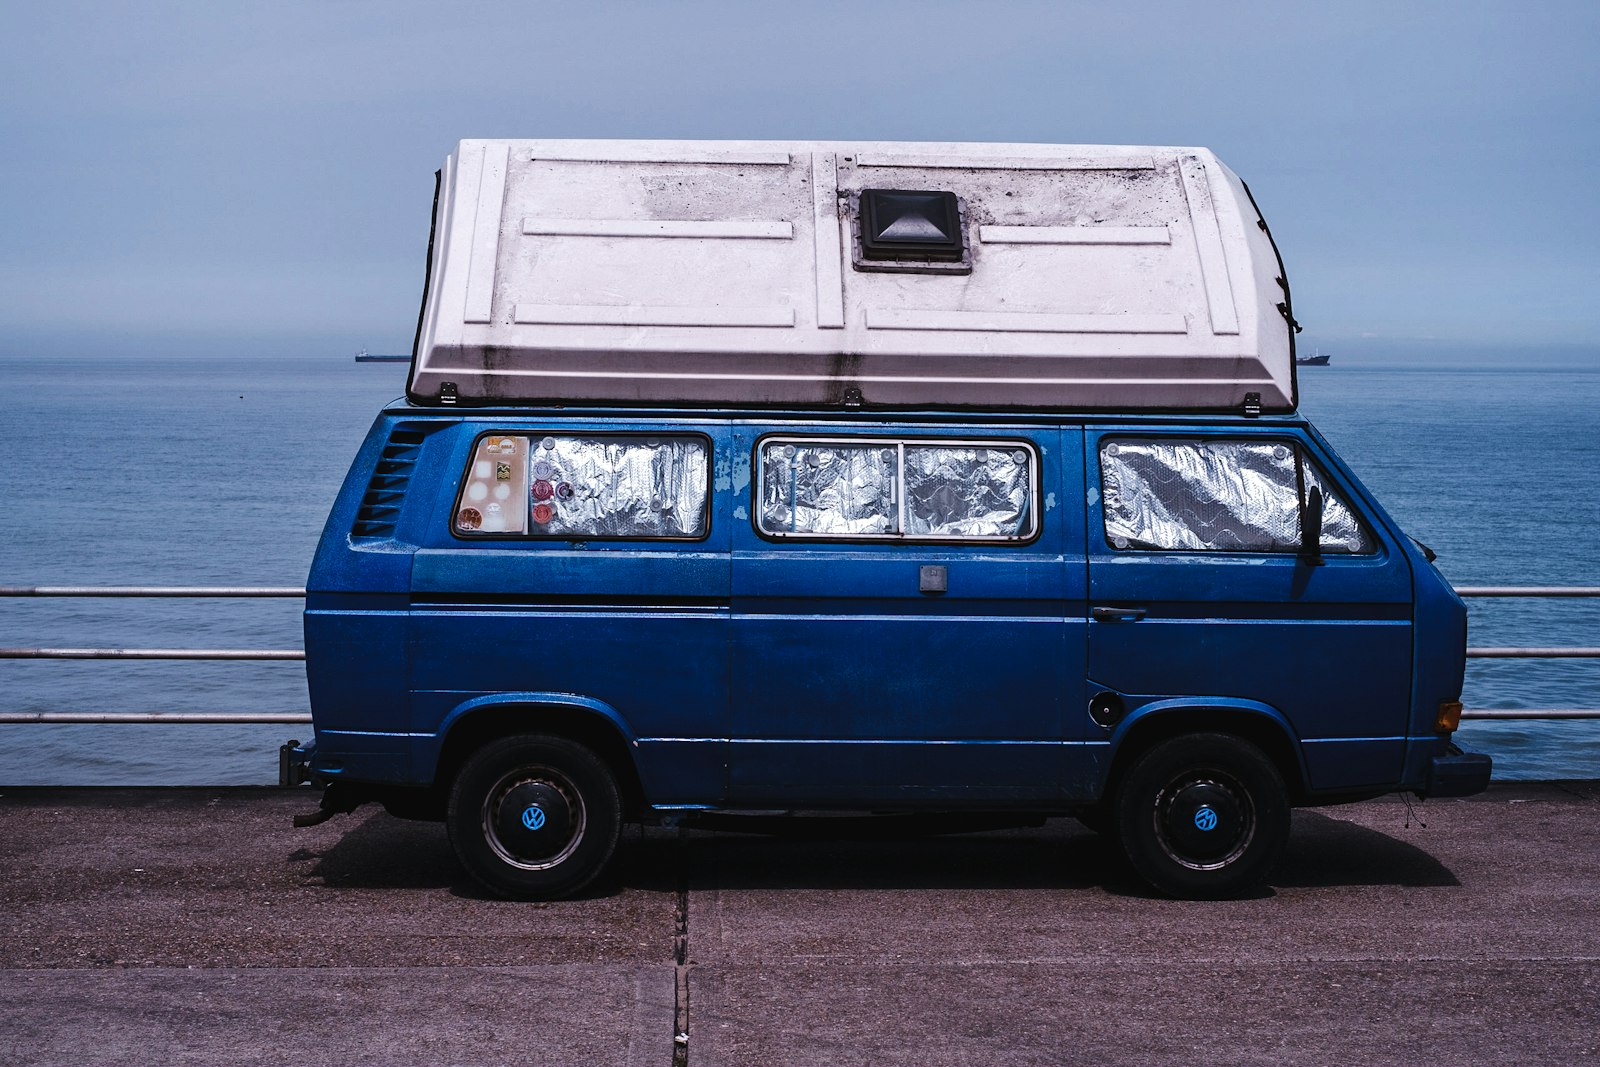 Fujifilm X-Pro1 sample photo. Blue van with container photography